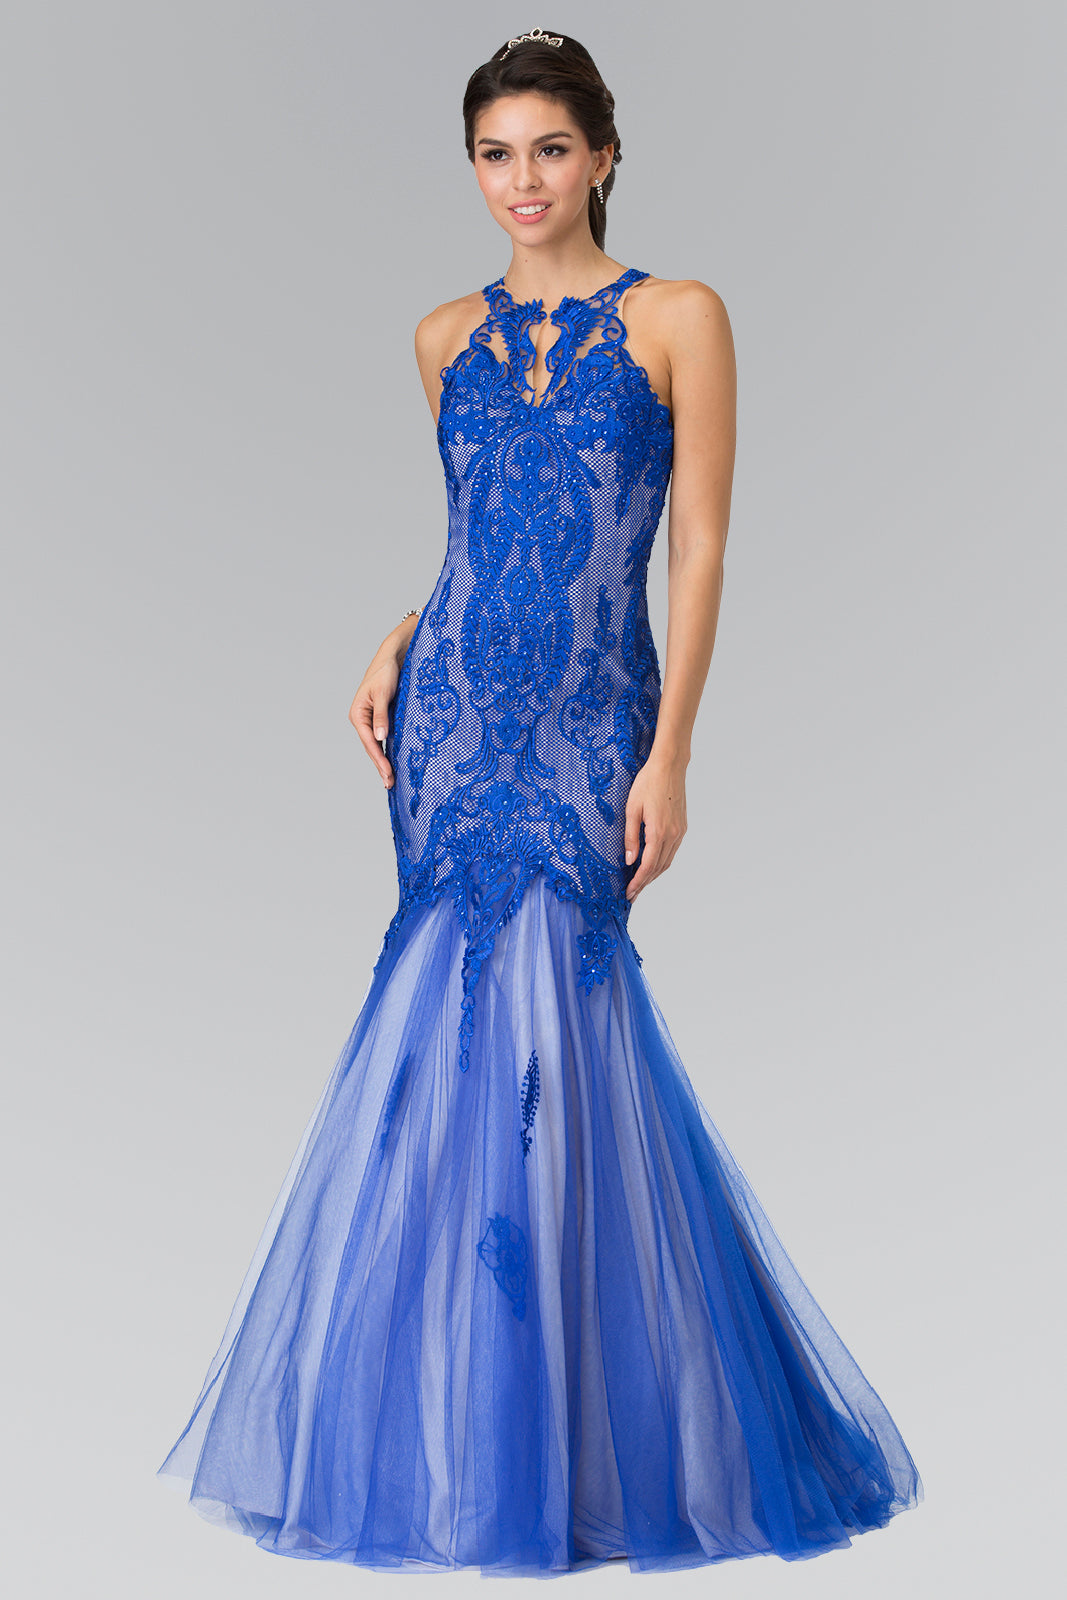 Halter Neck Long Mermaid Prom Dress with Lace Applique and Sheer Lace Back GLGL2219 Elsy Style PROM